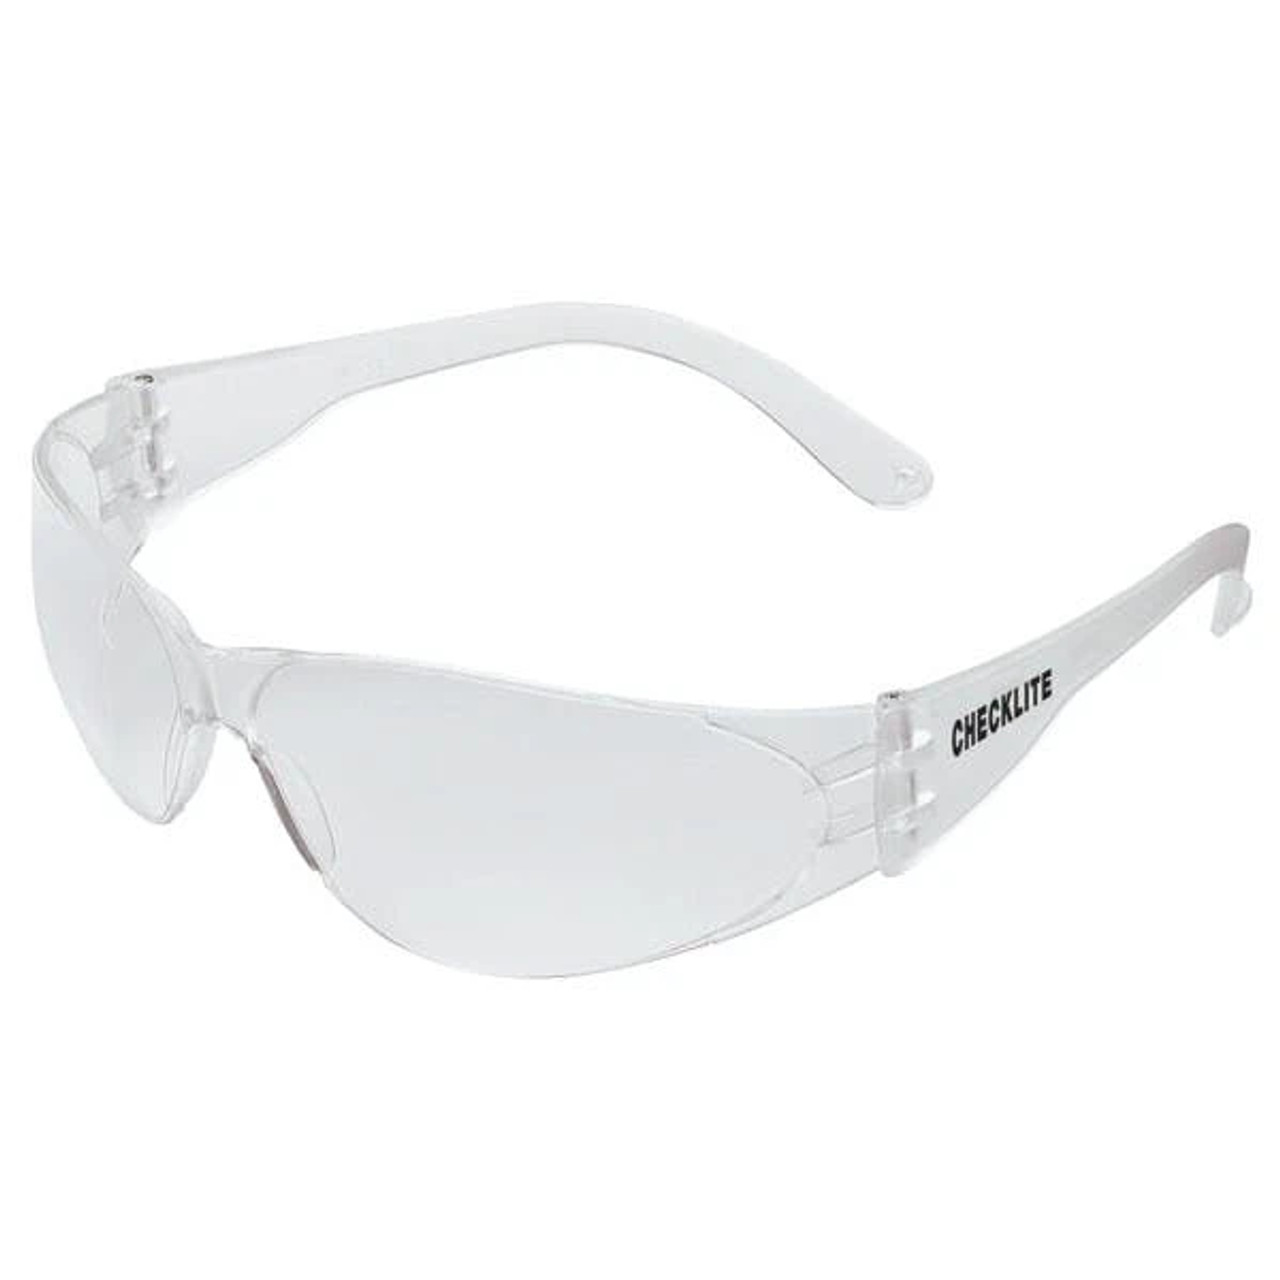 Checklite Safety Glasses Clear Lens Scratch Resistant Clear Frame